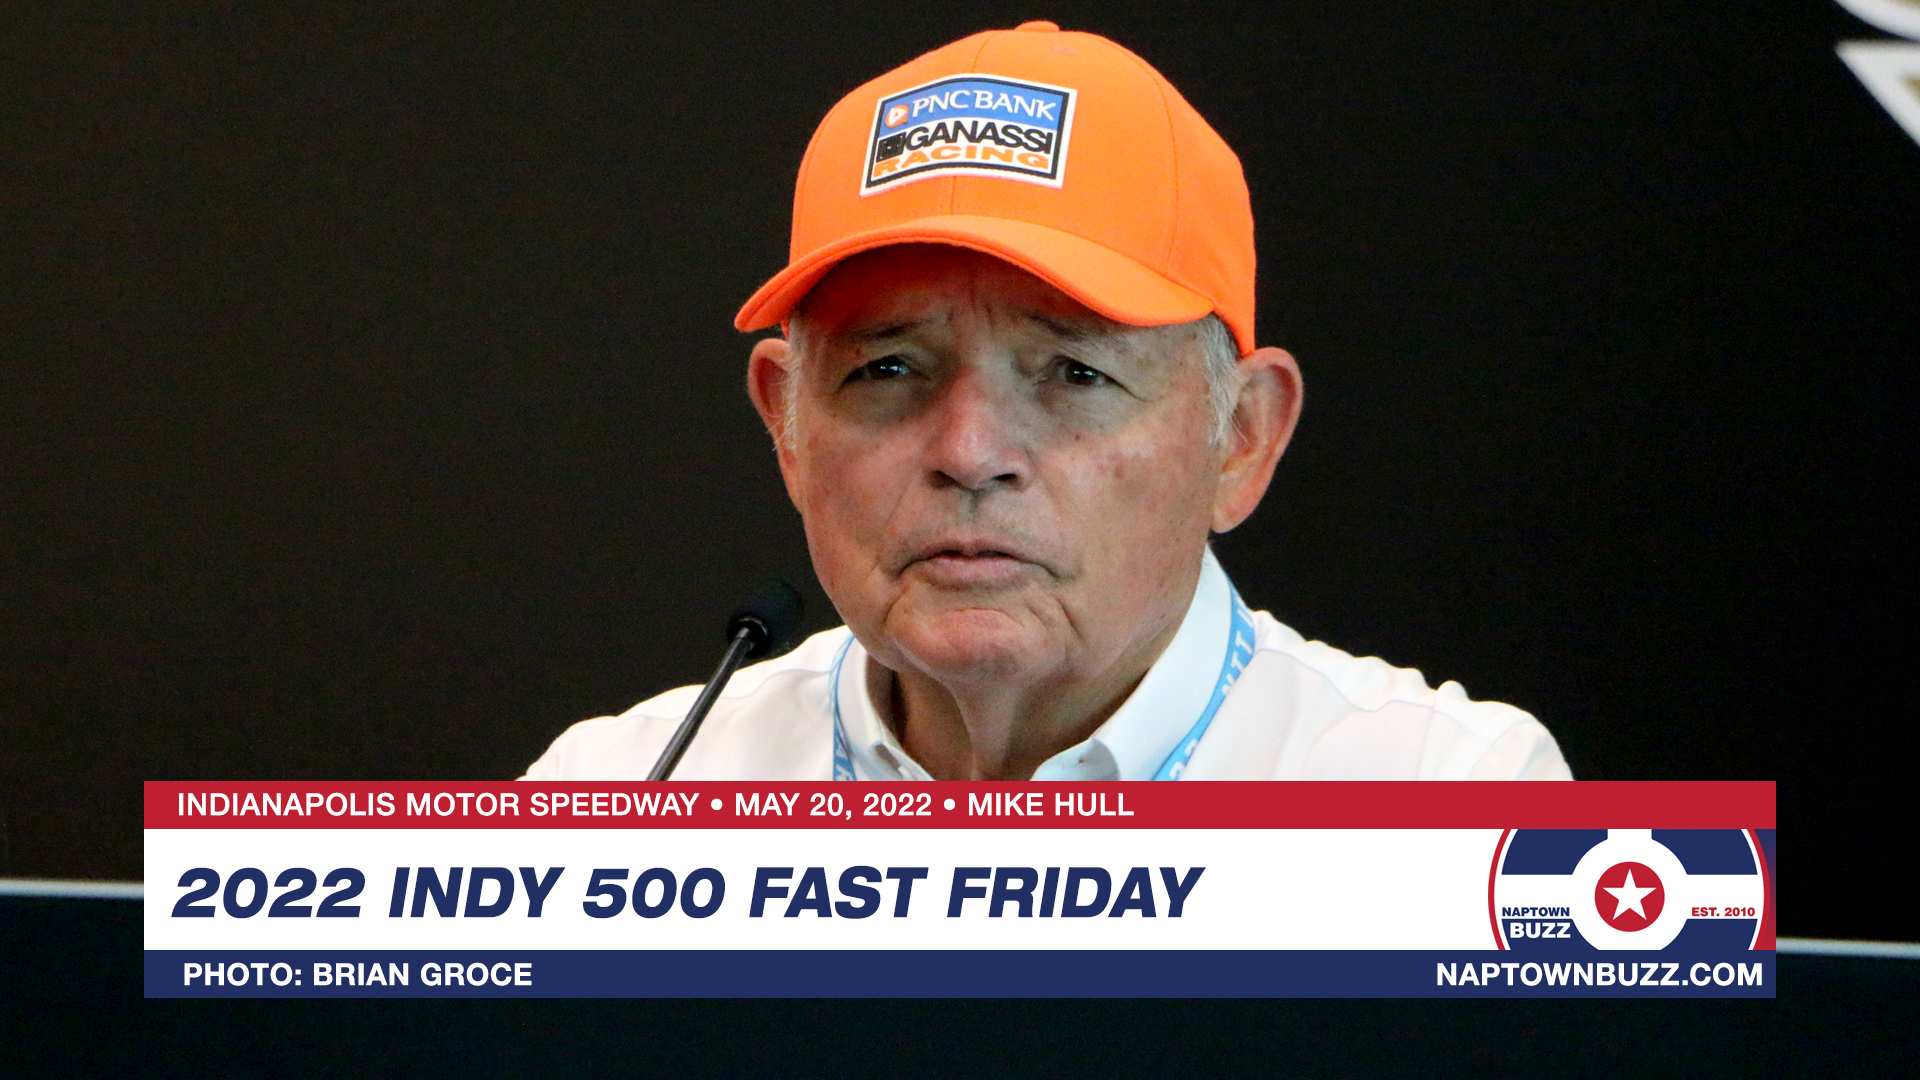 Mike Hull on Indy 500 Fast Friday Practice at Indianapolis Motor Speedway on May 20, 2022